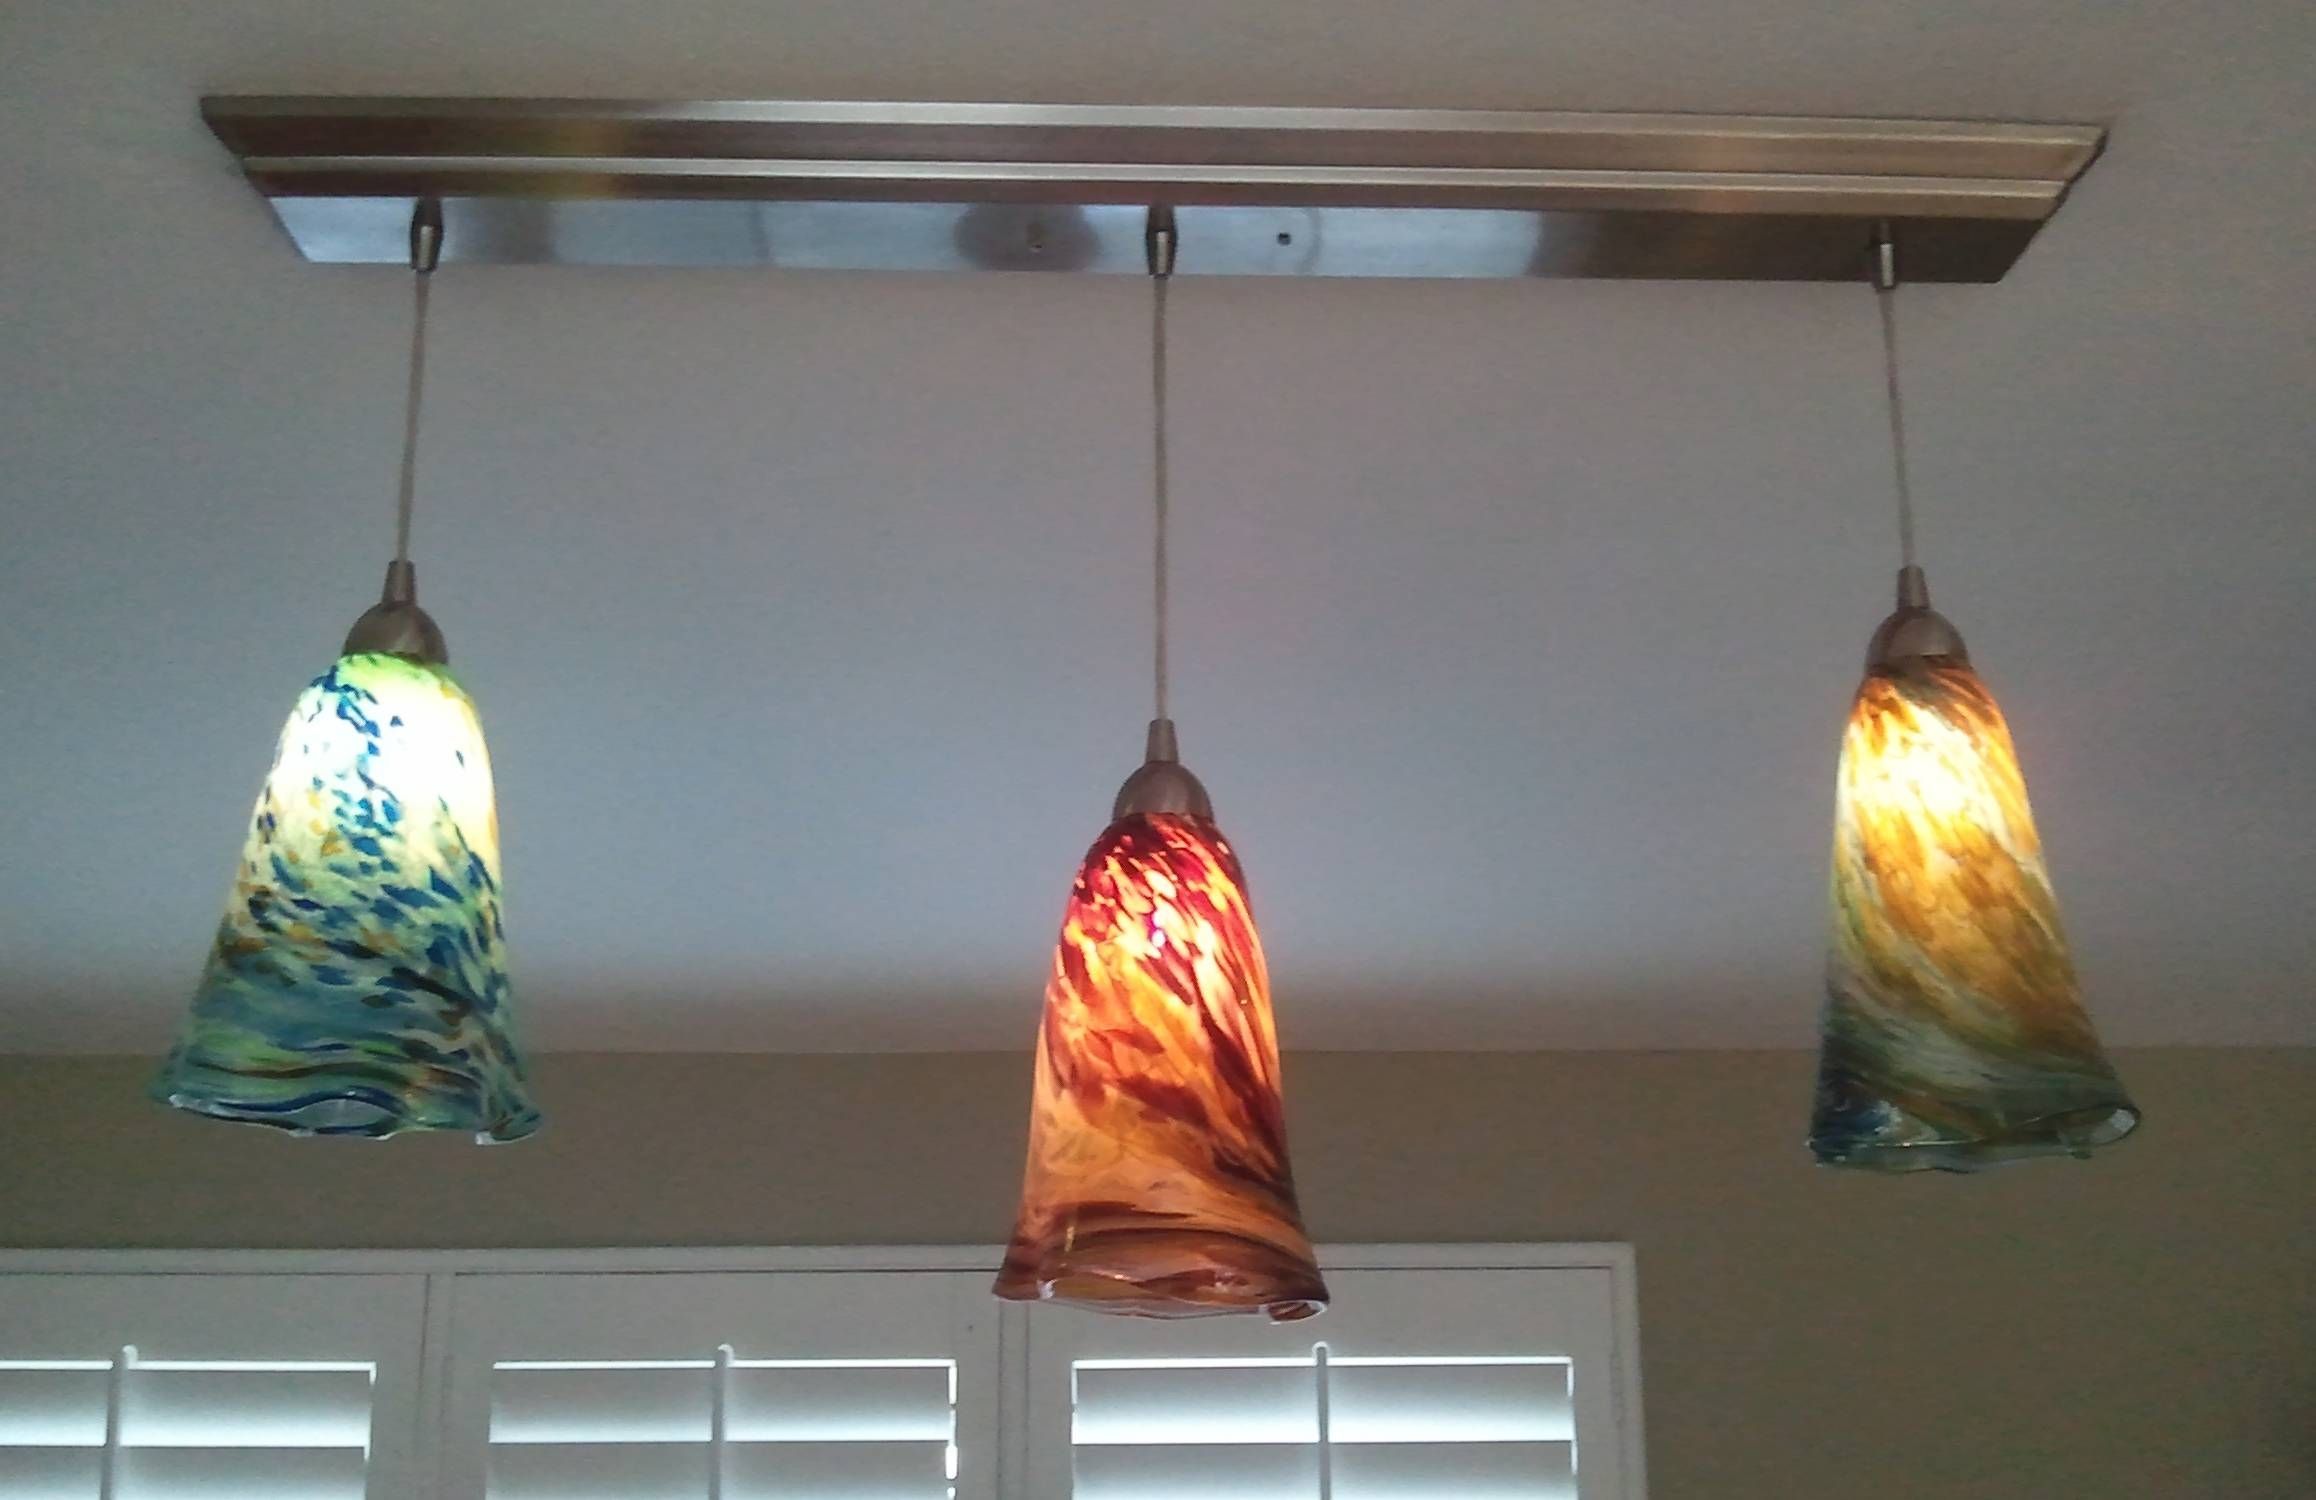 replacement glass globes for kitchen pendant light